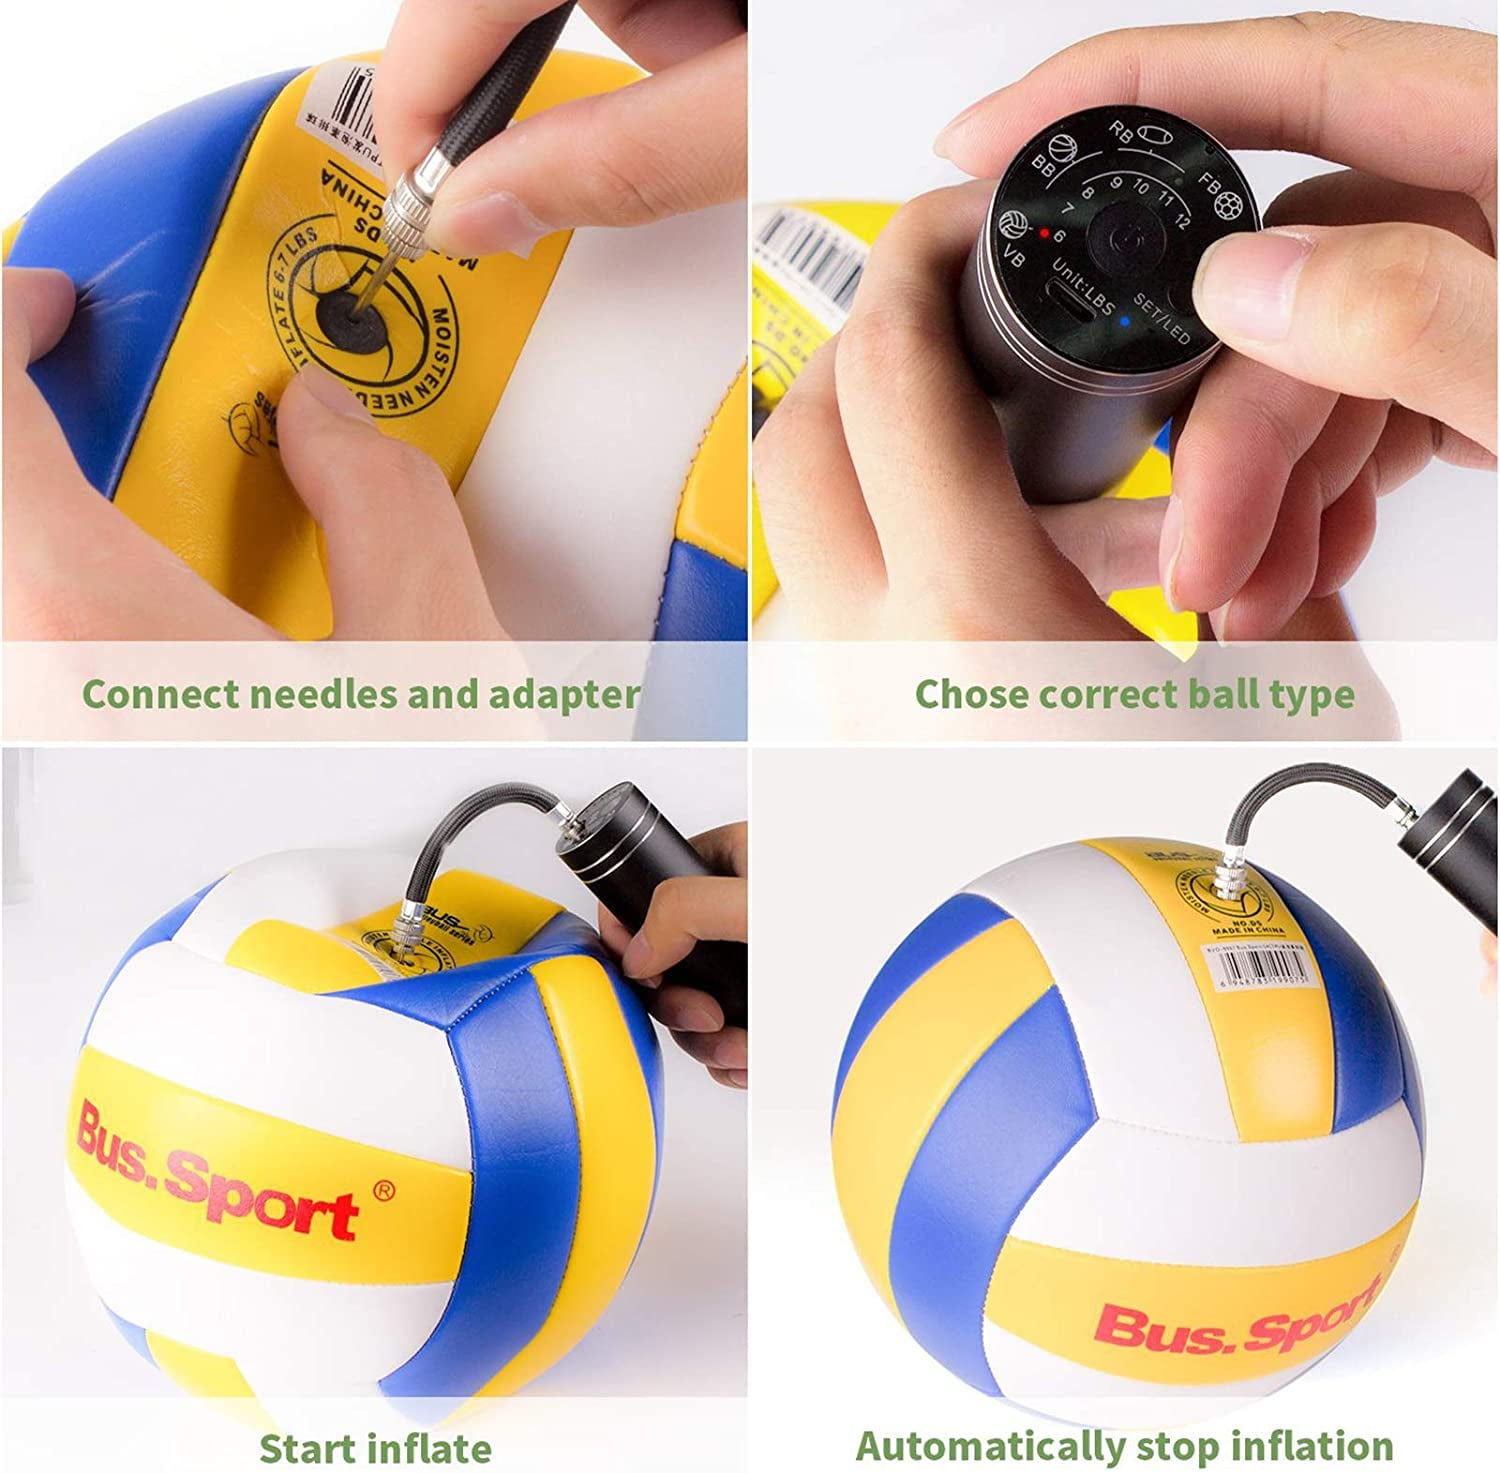 A perfect pump? This high-tech sports ball inflator finds early